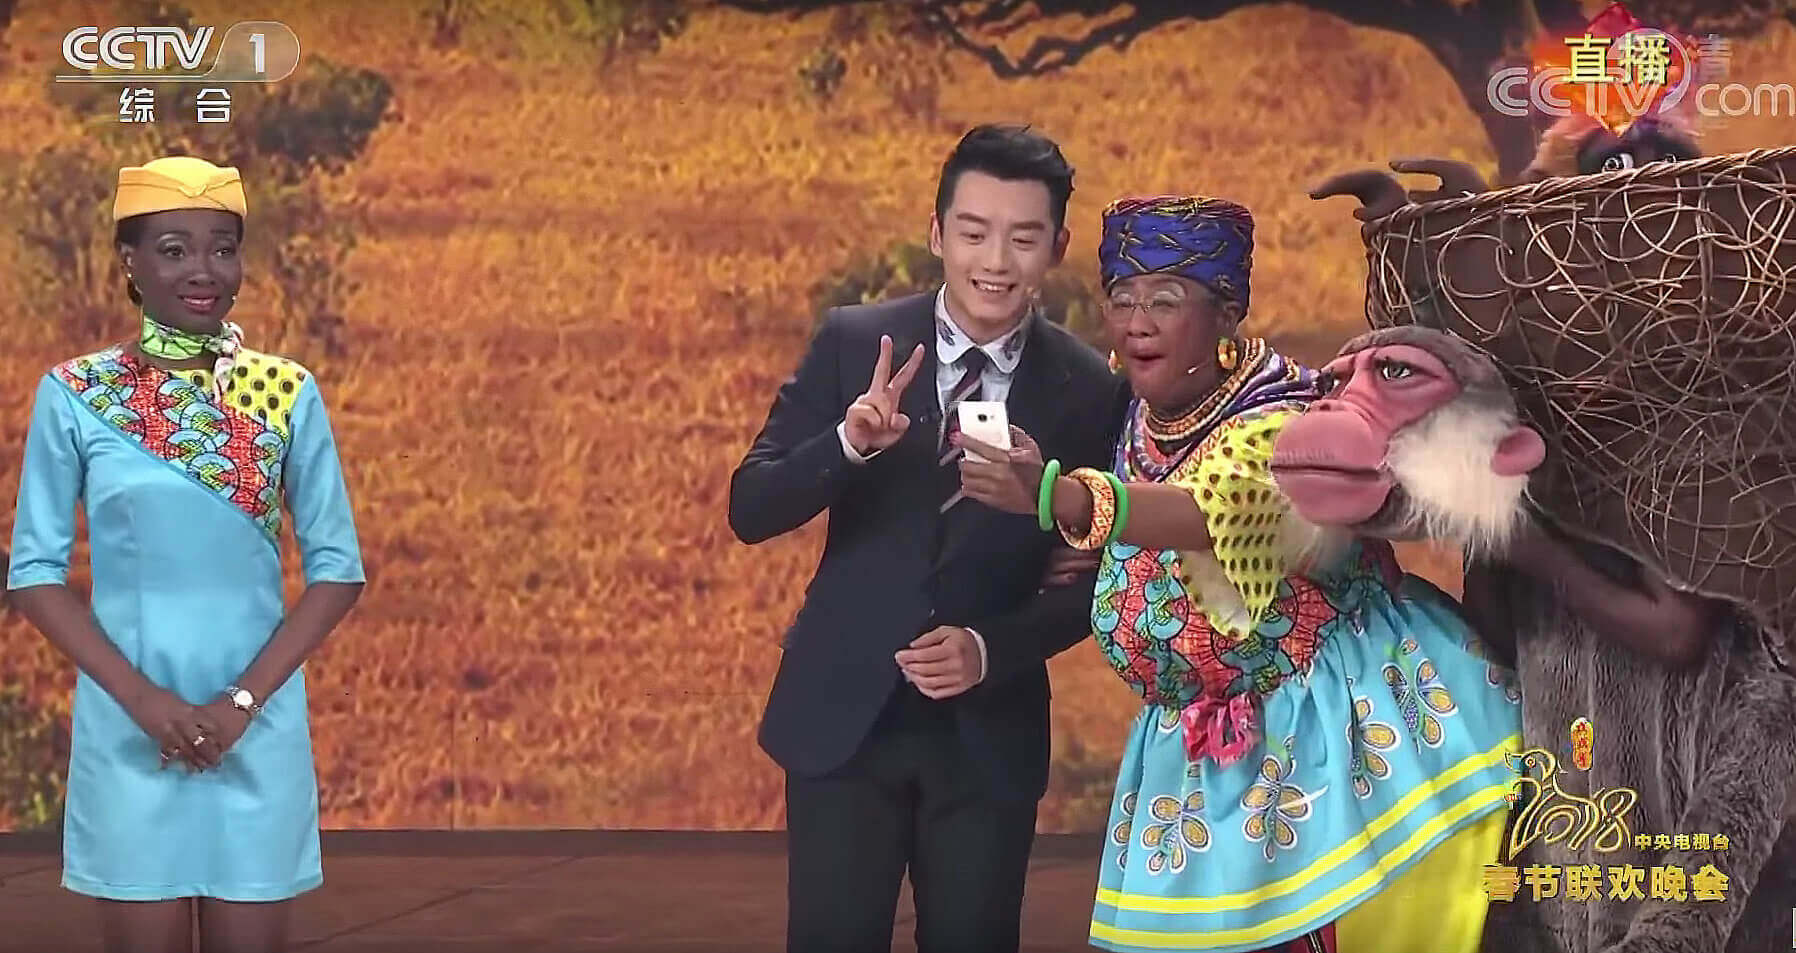 Chinese Government Videos Featuring Blackface, Turbans Met with Backlash in India